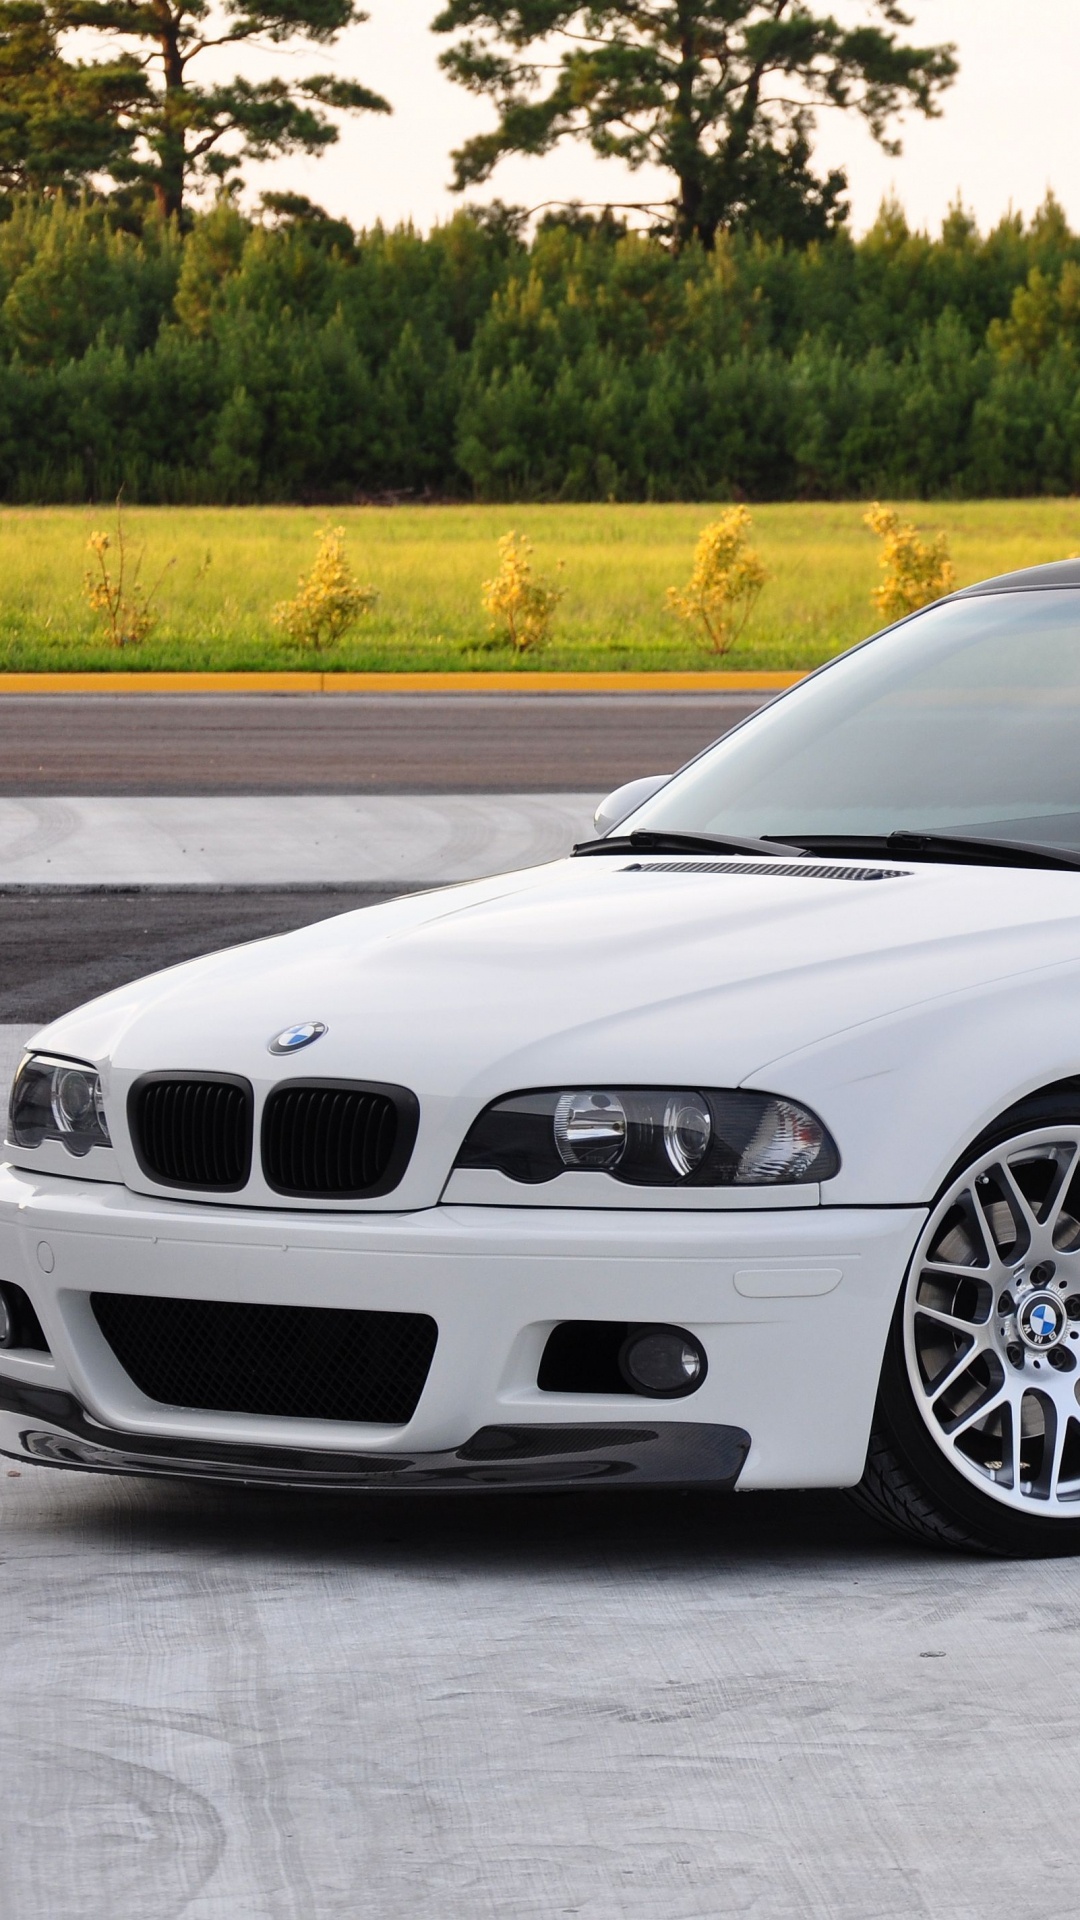 White Bmw m 3 Coupe on Road During Daytime. Wallpaper in 1080x1920 Resolution